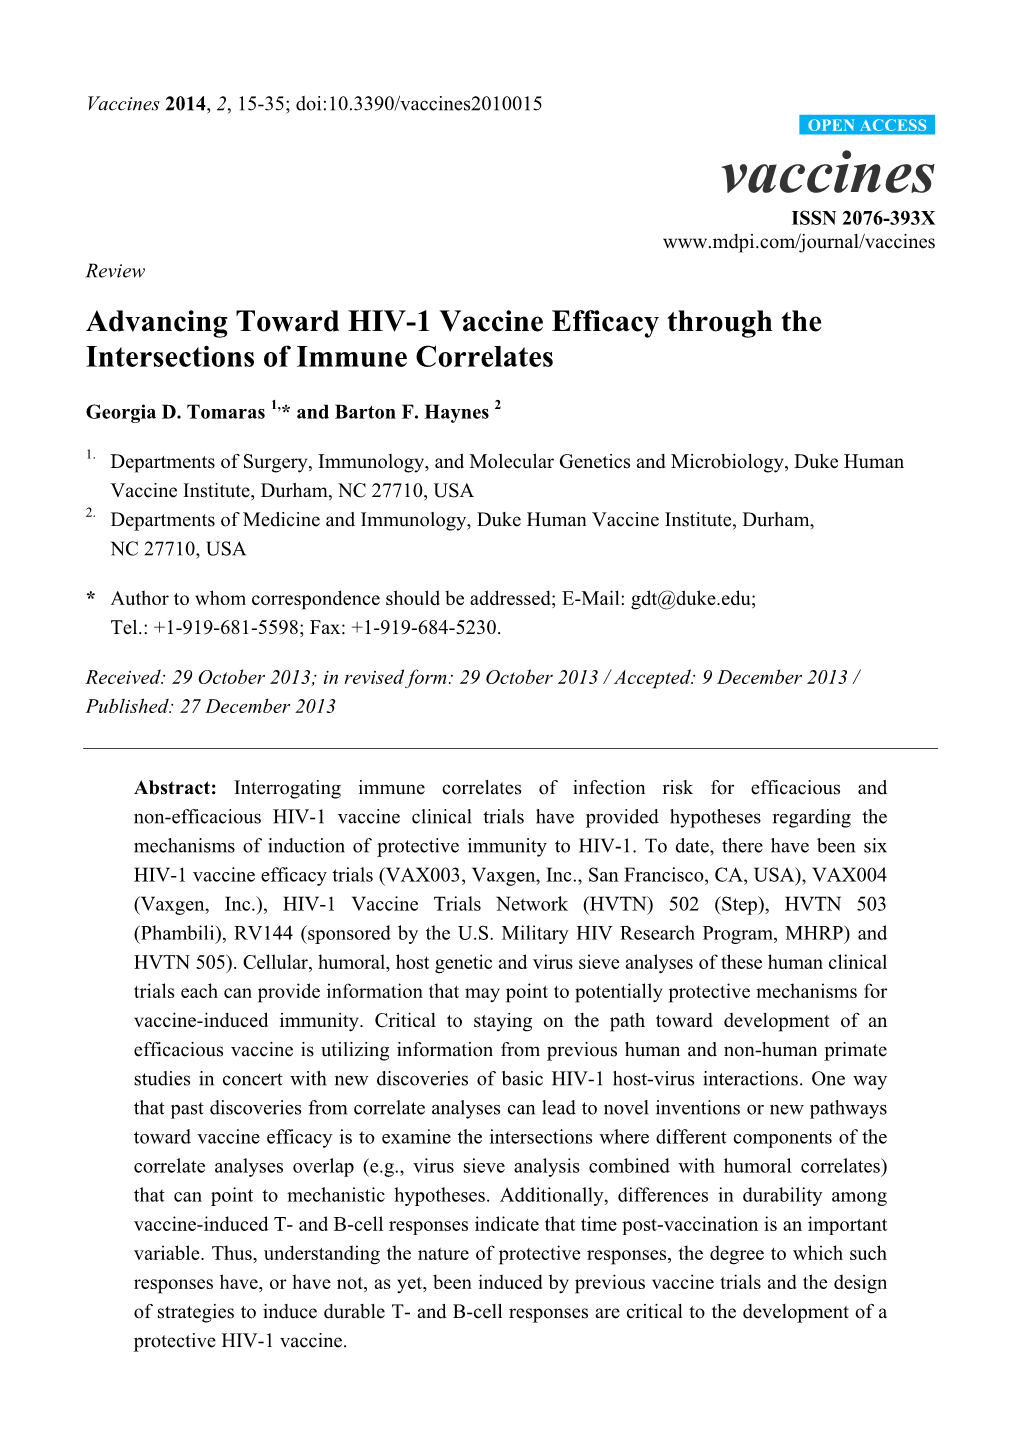 Advancing Toward HIV-1 Vaccine Efficacy Through the Intersections of Immune Correlates